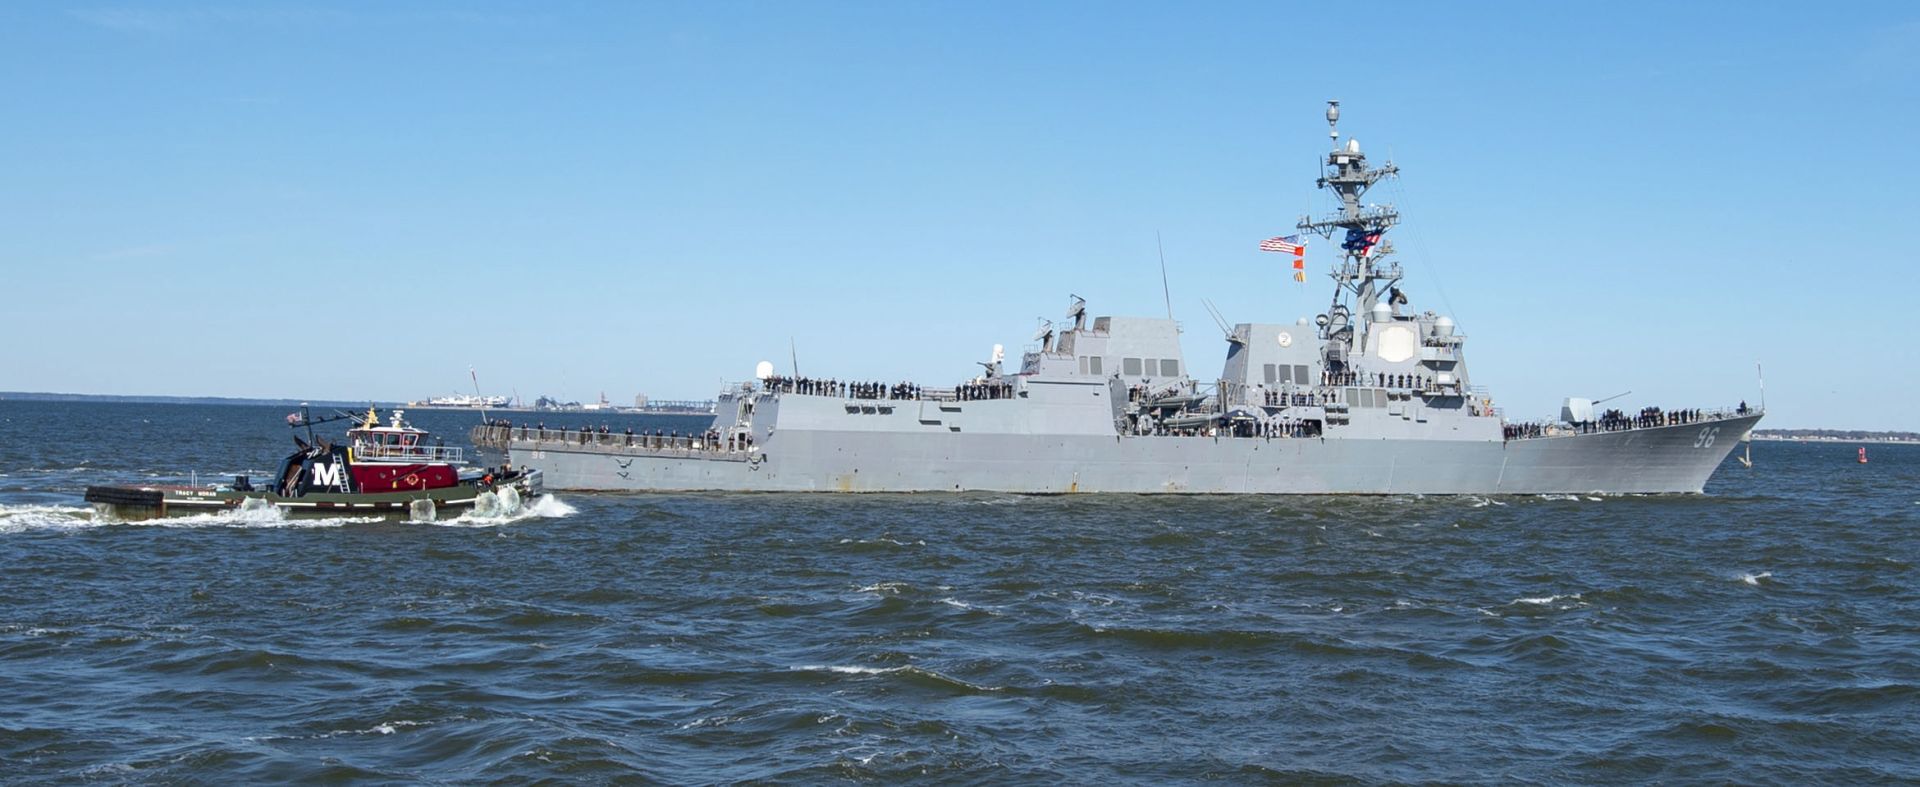 epa07647423 (FILE) - A handout photo made available by the US Navy shows the Arleigh Burke-class guided-missile destroyer USS Bainbridge (DDG 96) departing Naval Station Norfolk, Virginia, USA, 01 April 2019 (reissued 14 June 2019). According to the US military, the USS Bainbridge approached and provided aid to the vessels Front Altair and Kokokua Courageous after they were damaged by suspected explosions in the Gulf of Oman on 13 June 2019. The USA have accused Iran of being responsible for the attacks while Tehran rejects the claims.  EPA/JORDAN BAIR / US NAVY HANDOUT  HANDOUT EDITORIAL USE ONLY